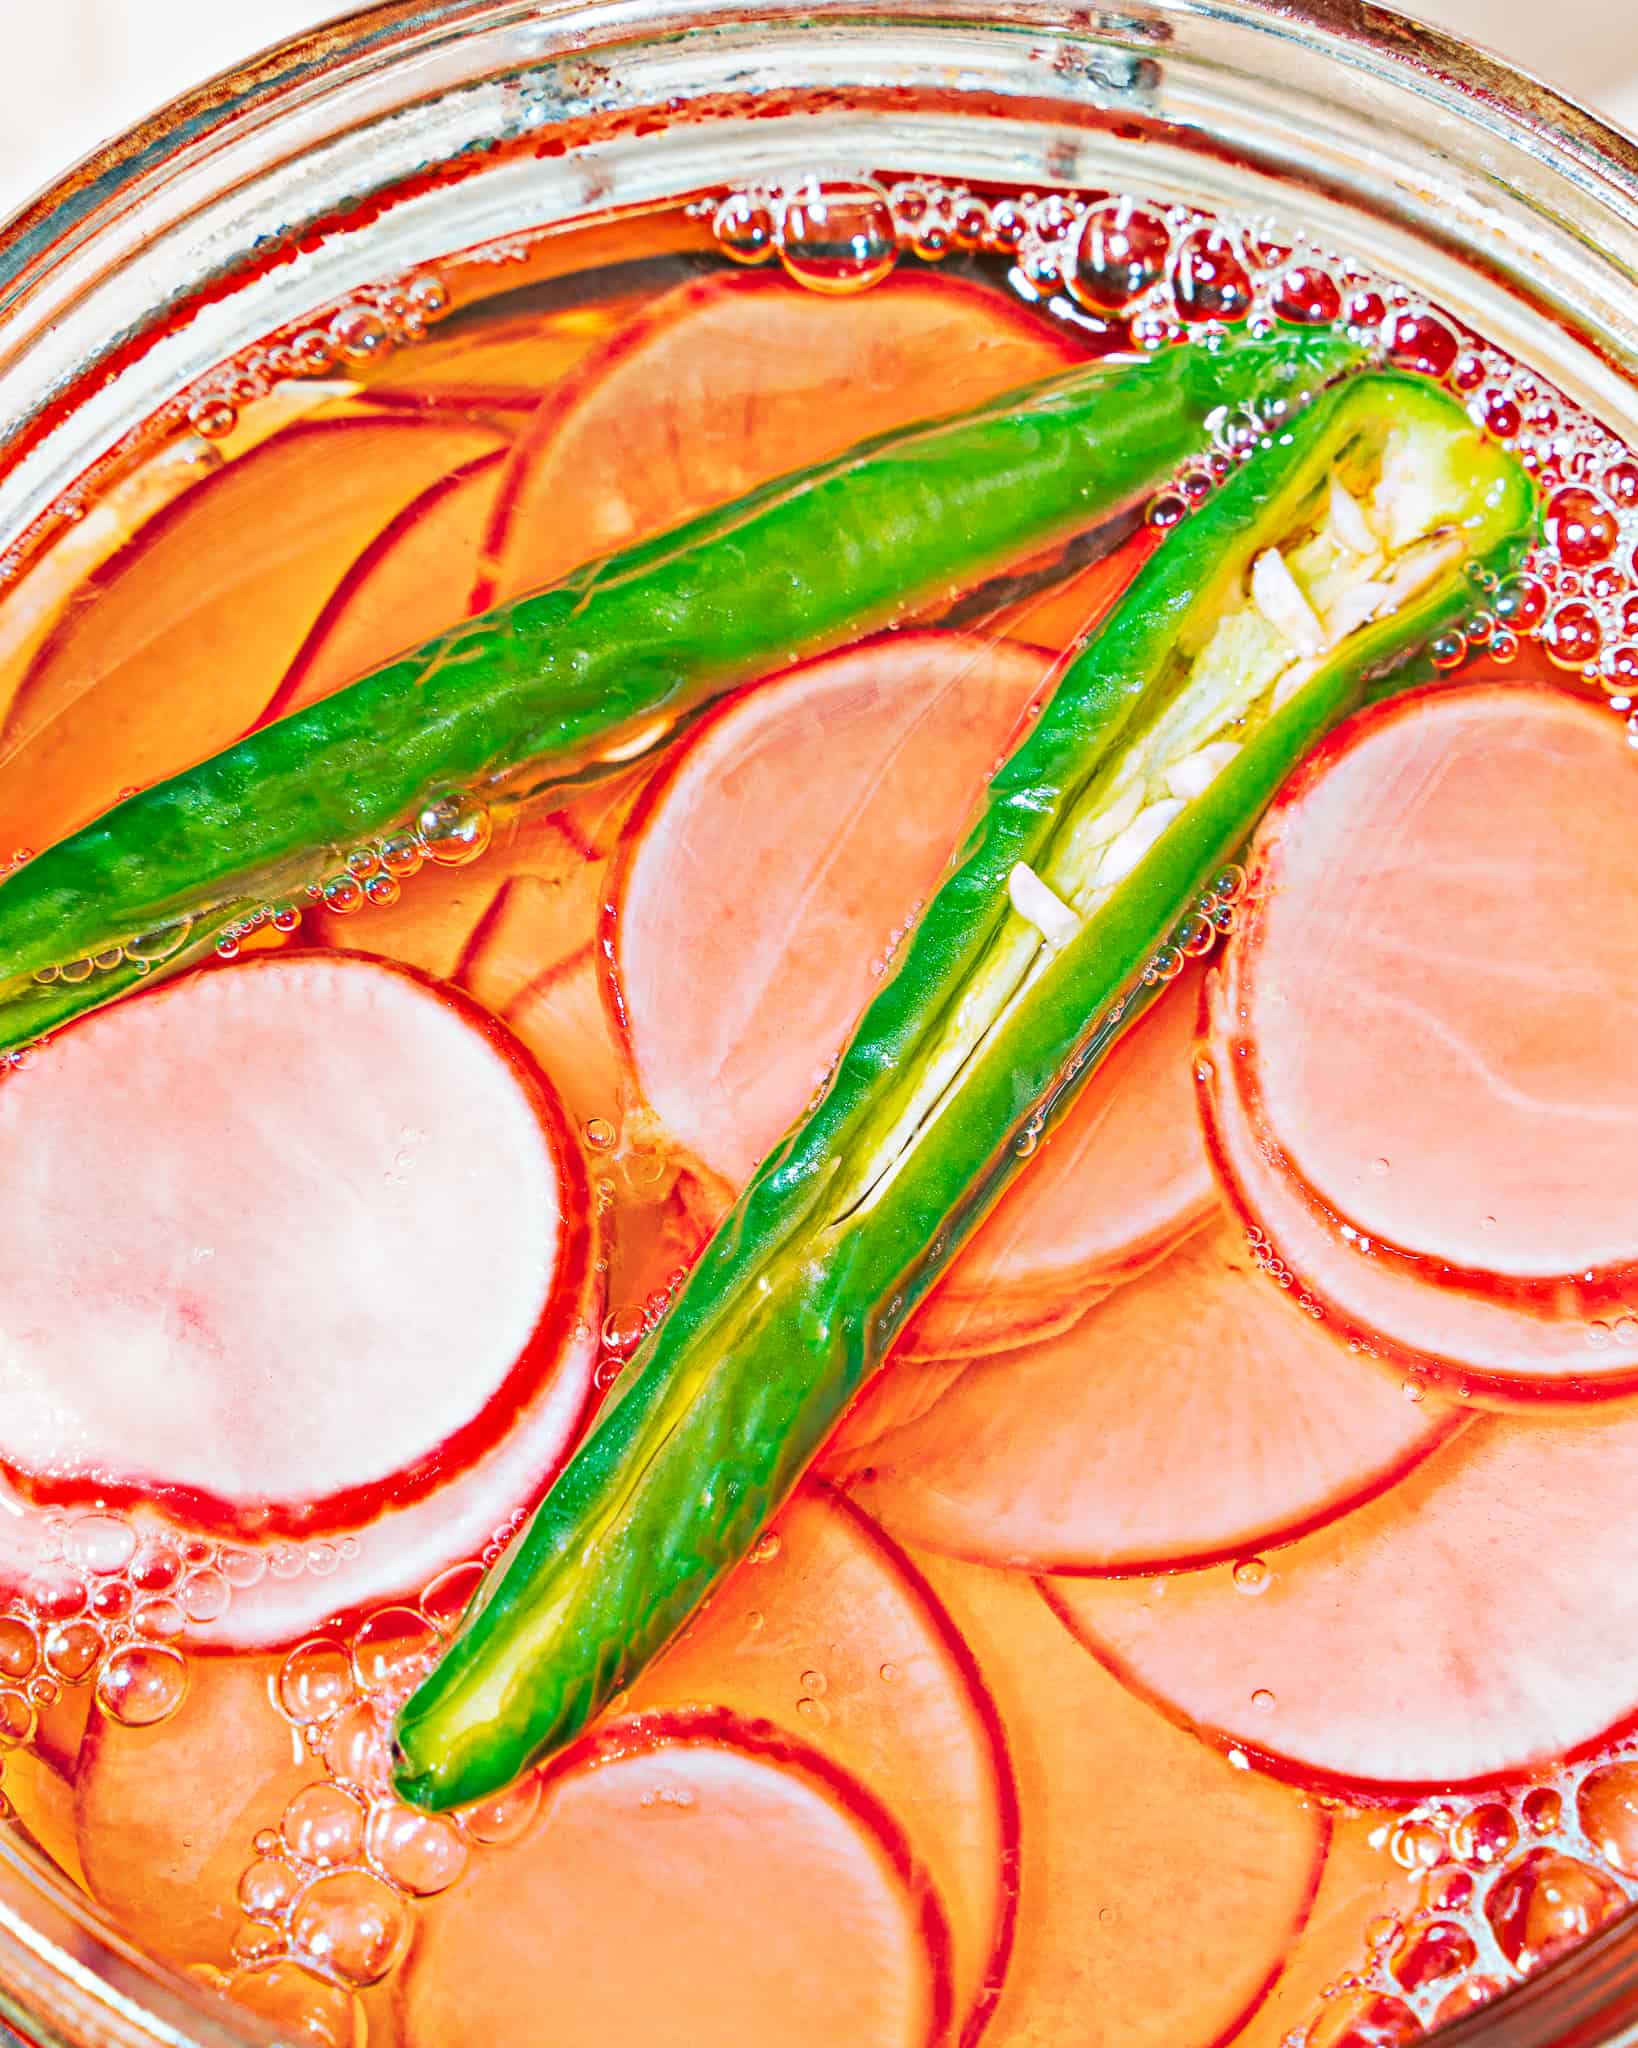 close up of glass jar with radish slices and sliced serrano peppers